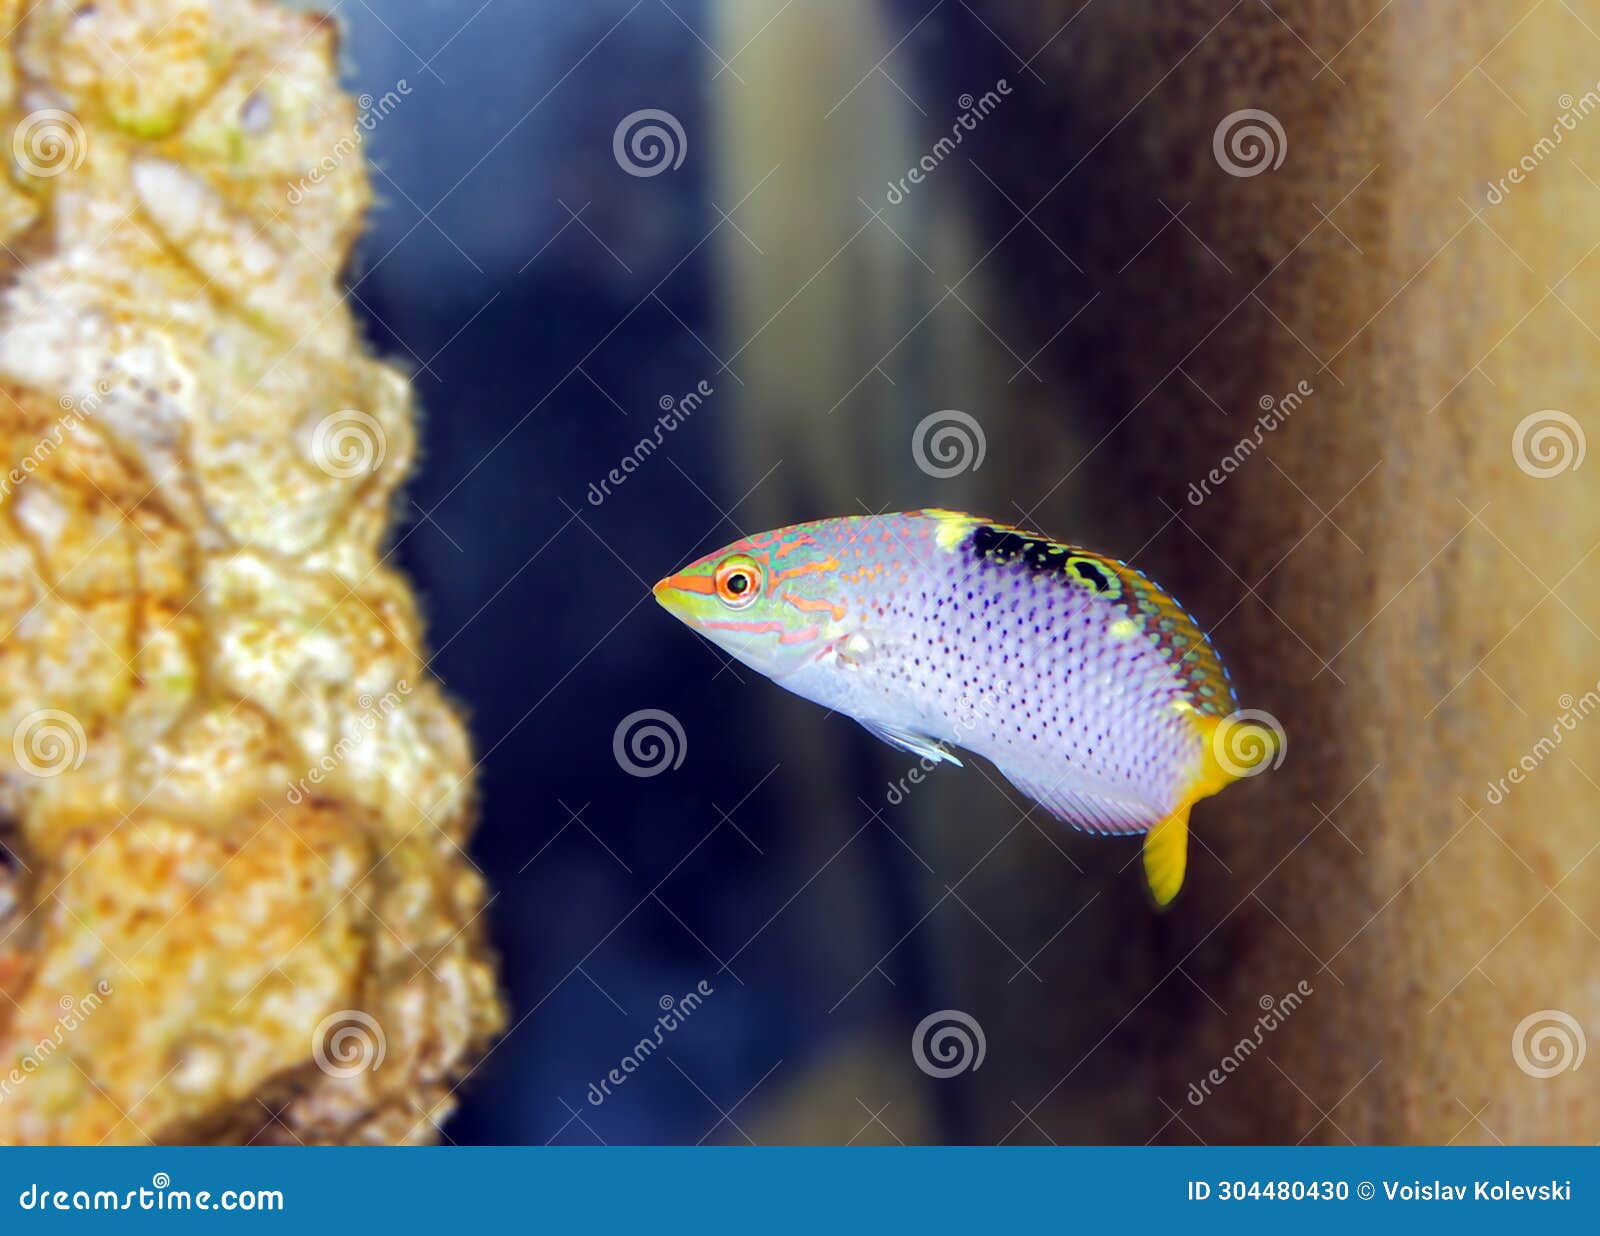 the checkerboard wrasse (halichoeres hortulanus) is a fish belonging to the wrasse family.